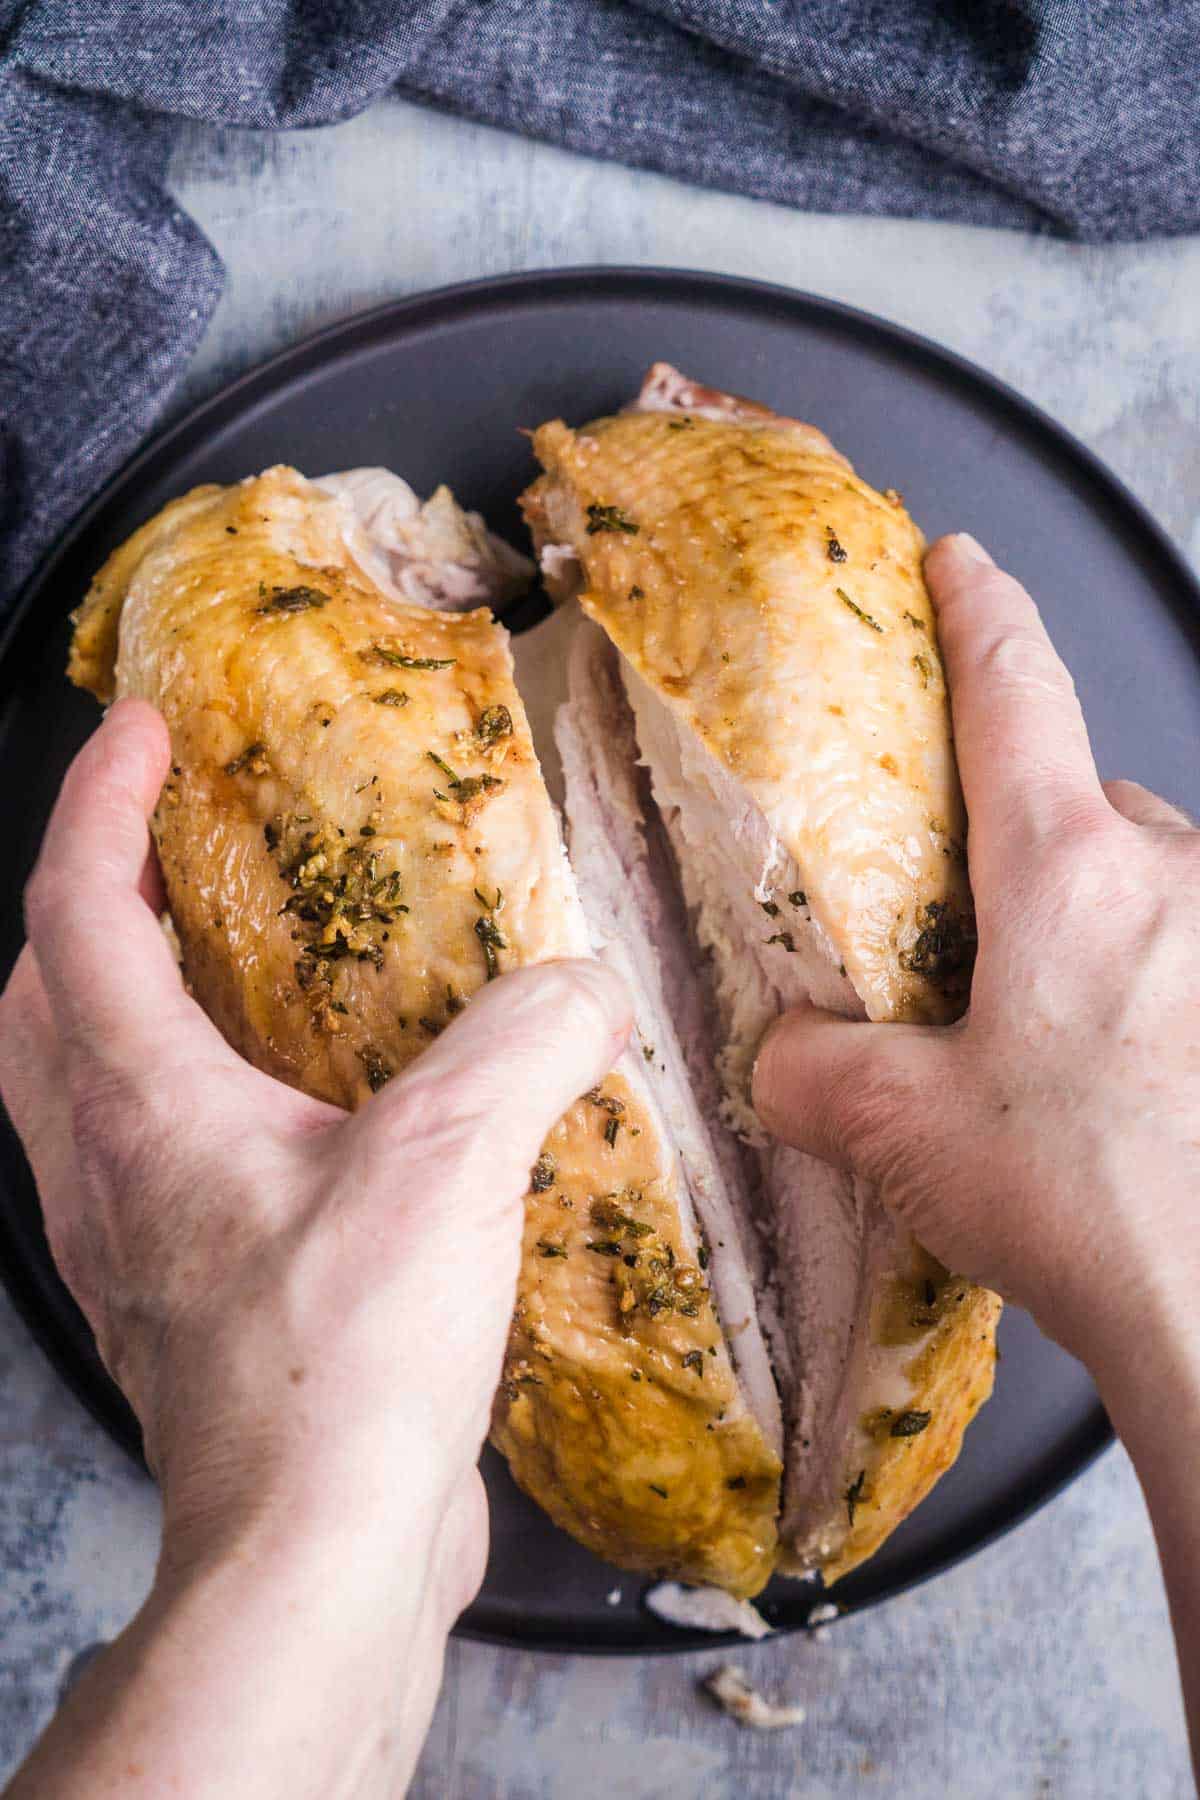 two hands separate baked turkey breast meat from cavity